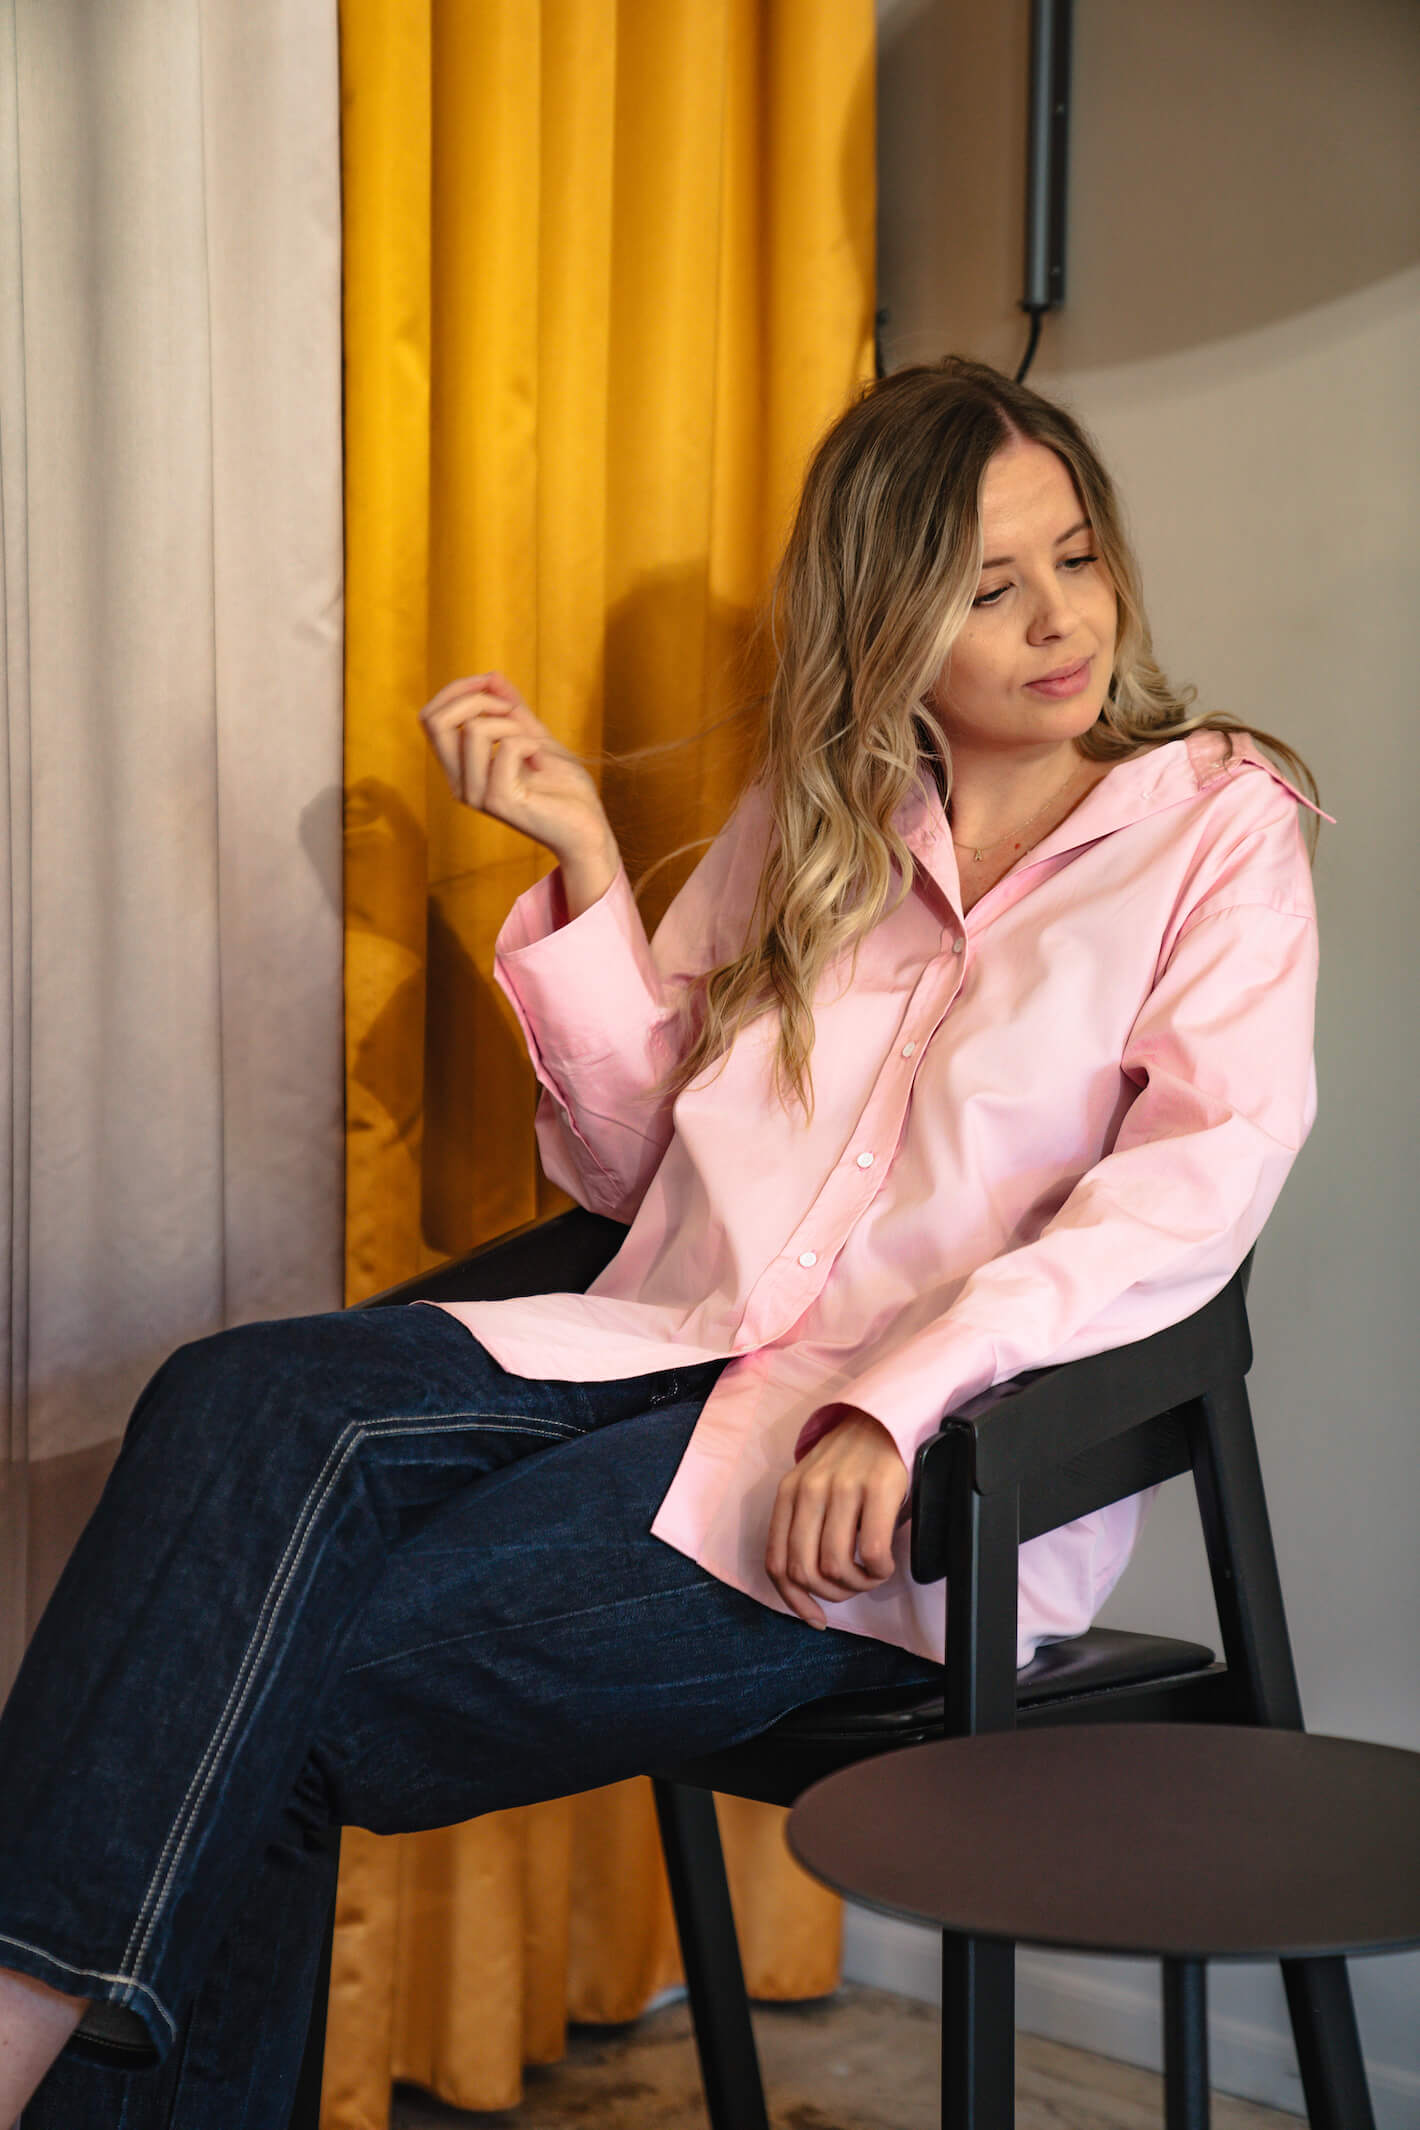 Woman sitting on a black chair wearing a pink button-down shirt and dark denim jeans from Cyme Copenhagen's spring/summer 2024 collection. She has blonde hair and the setting features a background with yellow and white curtains, adding a touch of warmth and elegance to the stylish, casual look.